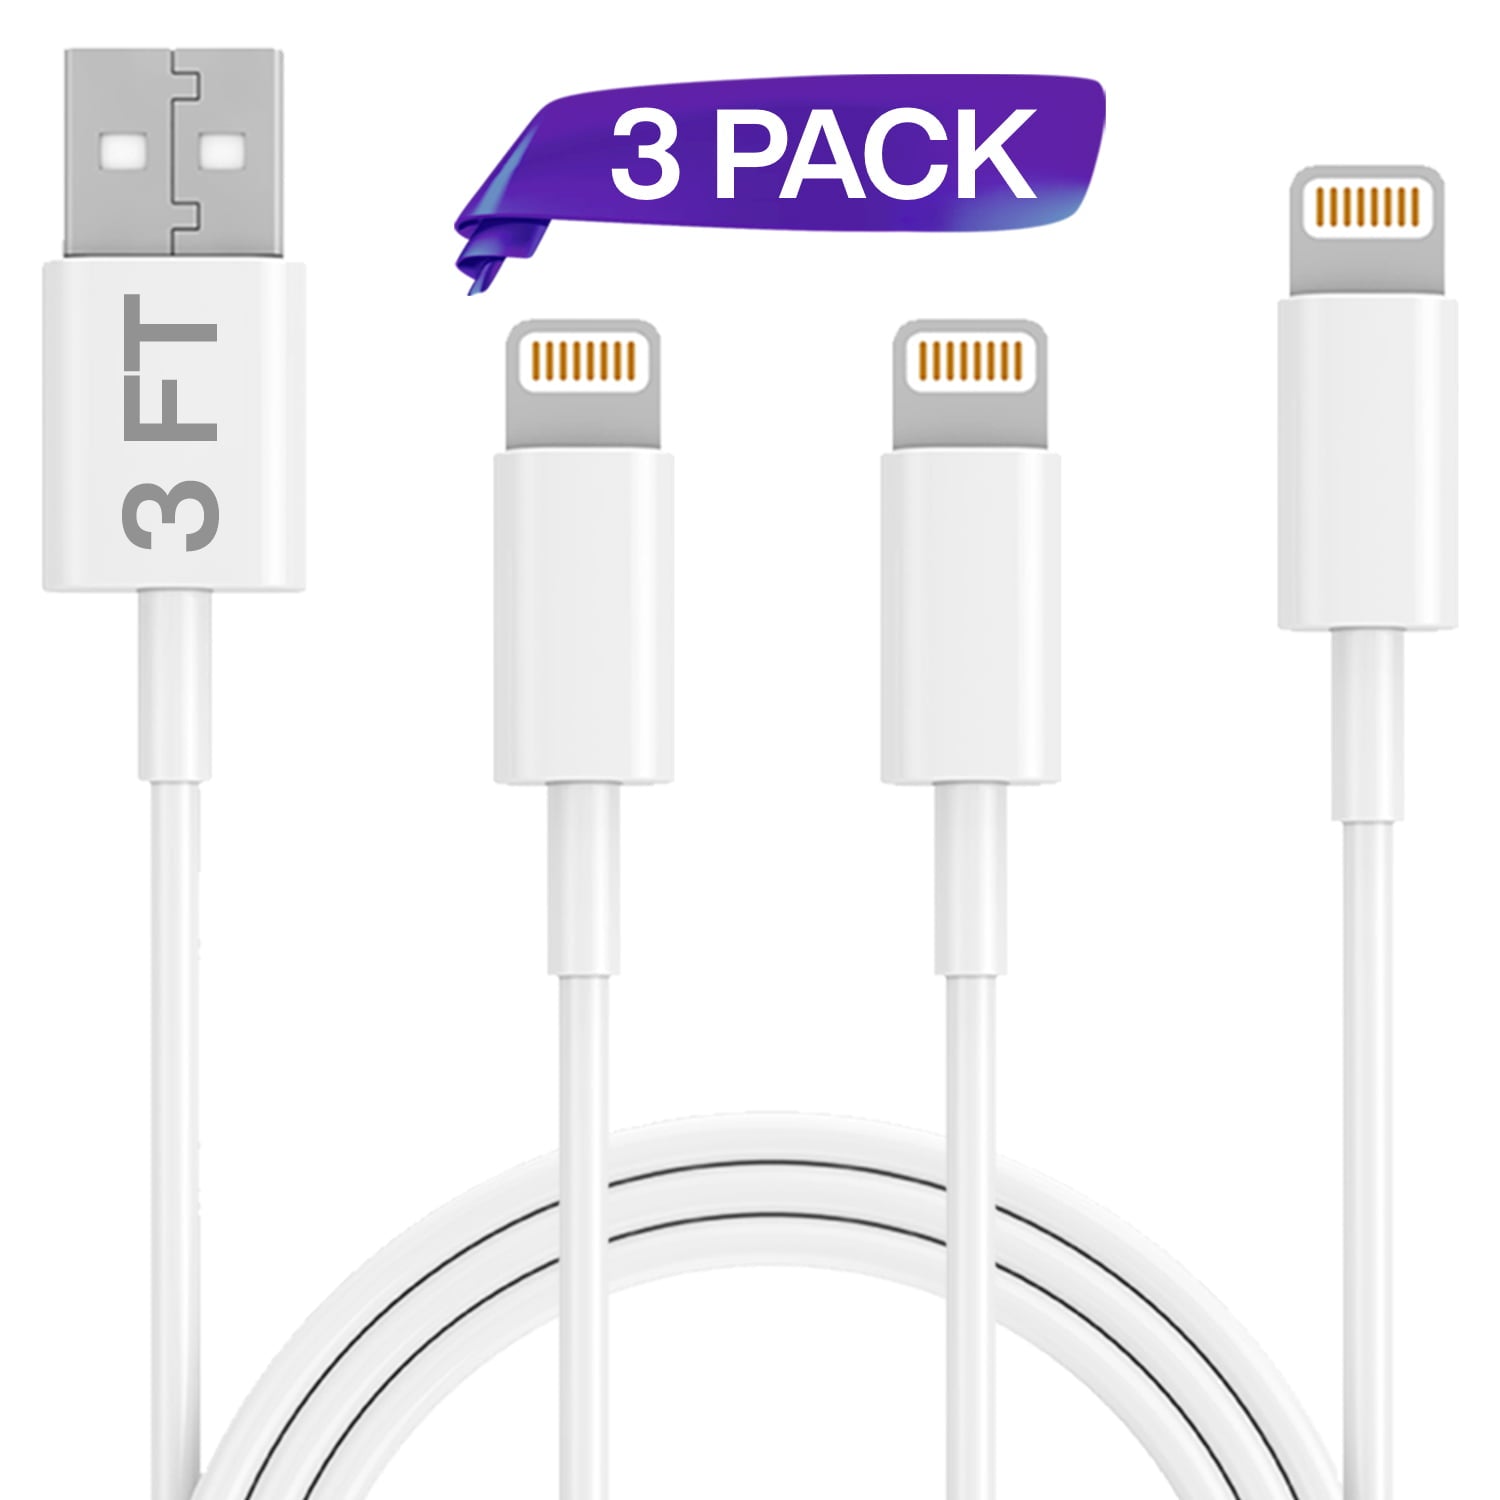 Charger Lightning Cable Set, Infinite Power, 3 Pack 3FT USB Cable, Compatible with iPhone 13/12/11/14/14 Pro max/13/13 Pro Charging & Syncing Cord